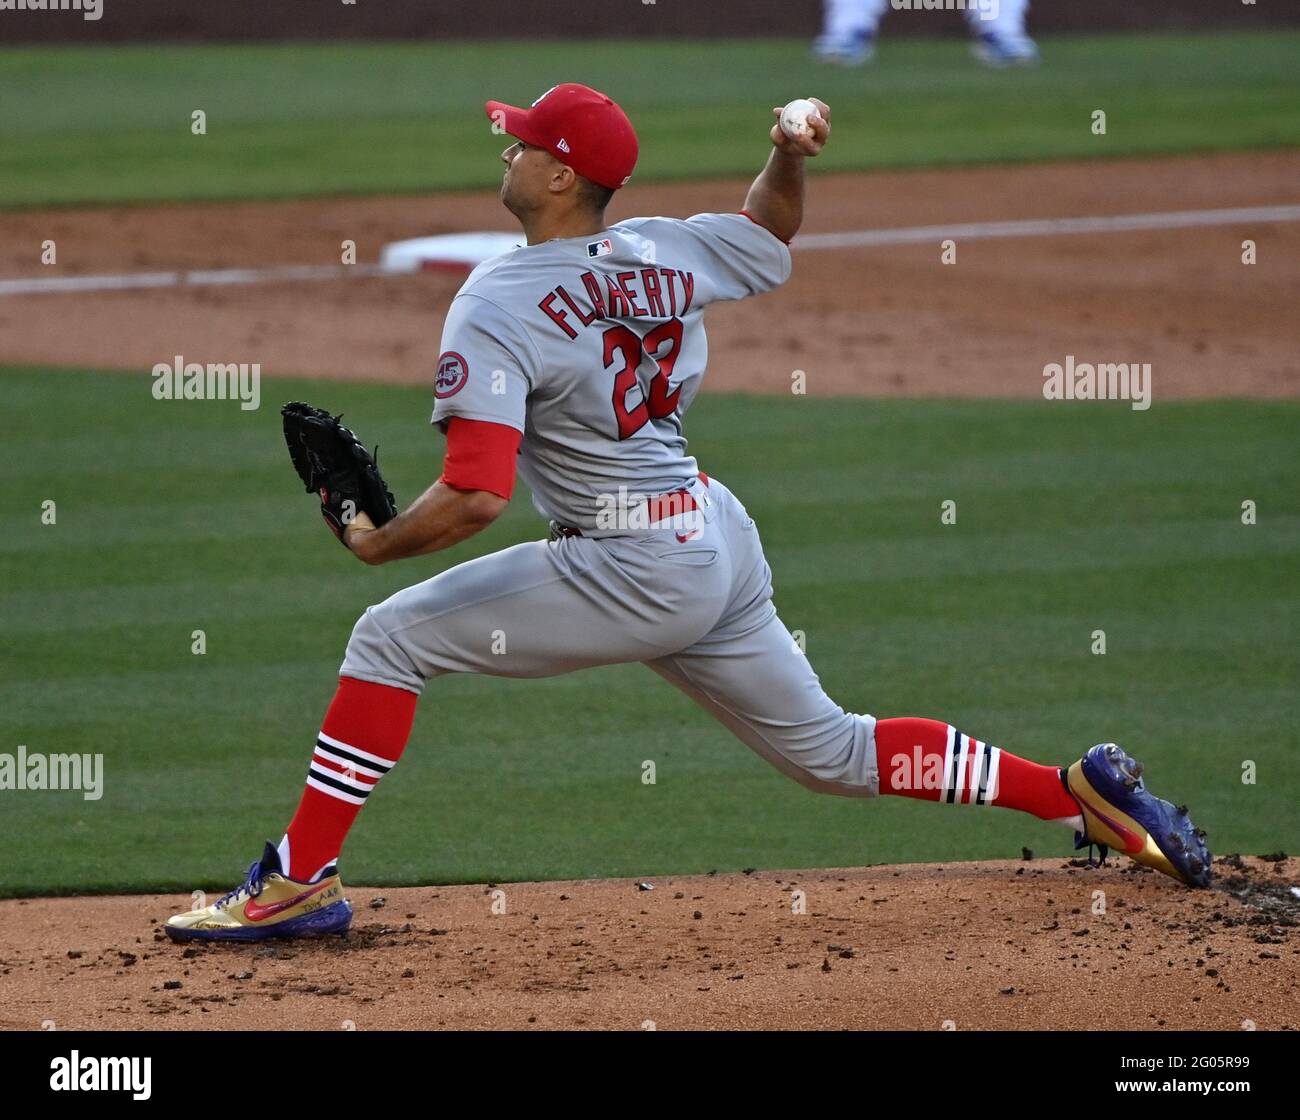 Los Angeles, United States. 01st June, 2021. St. Louis Cardinals' starting pitcher Jack Flaherty wins up to deliver against the Los Angeles Dodgers' during the second inning at Dodger Stadium in Los Angeles on Monday, May 31, 2021. Photo by Jim Ruymen/UPI Credit: UPI/Alamy Live News Stock Photo